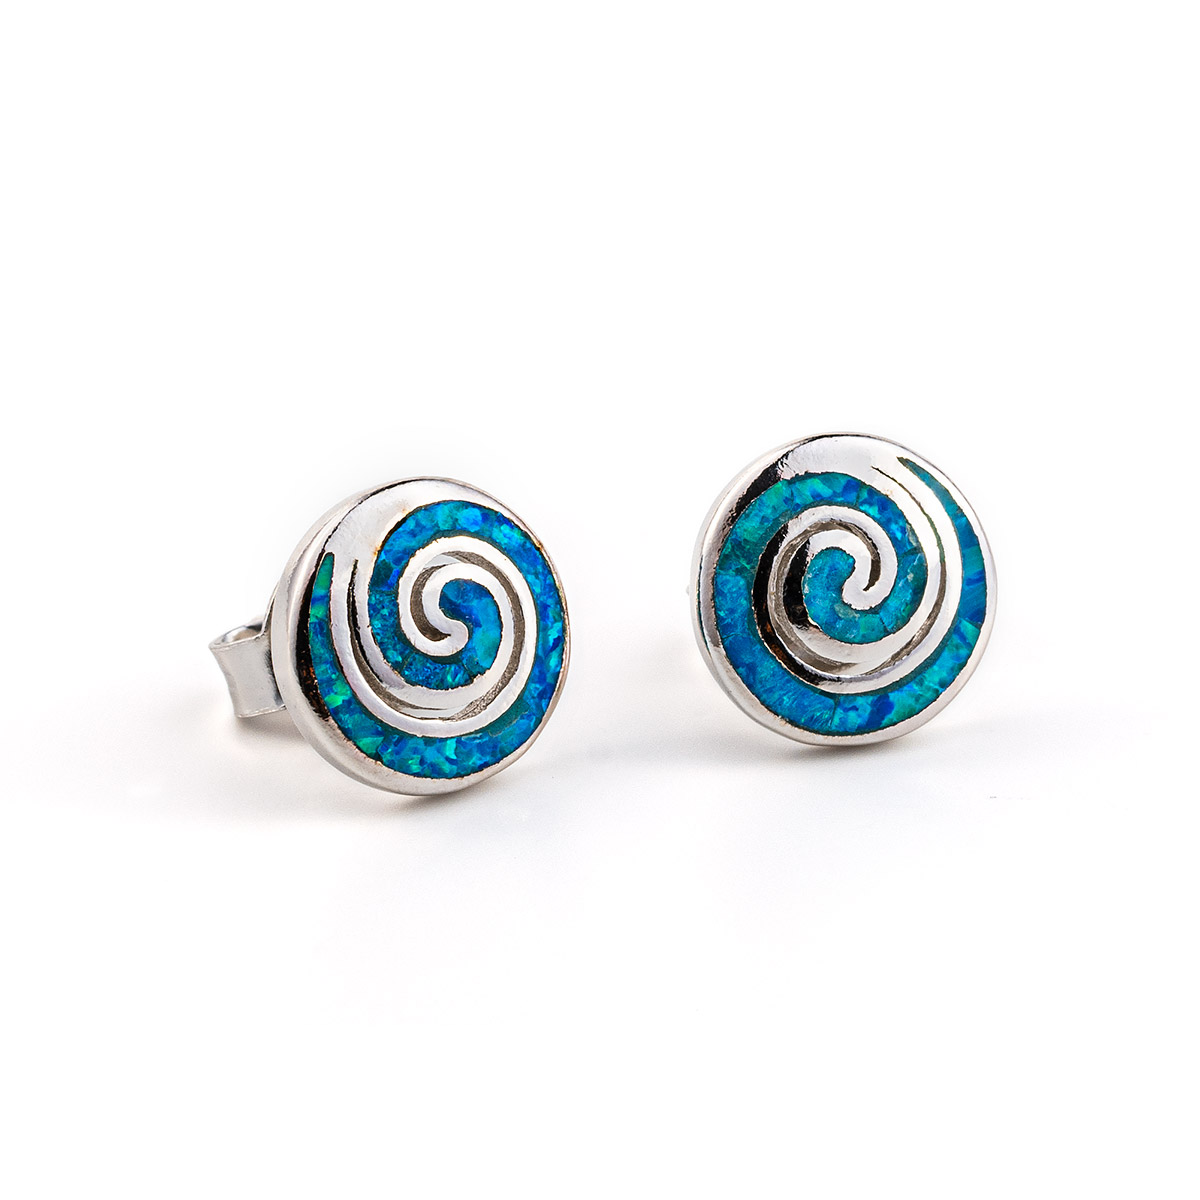 Spiral Stud Earrings - Sterling Silver with Opal